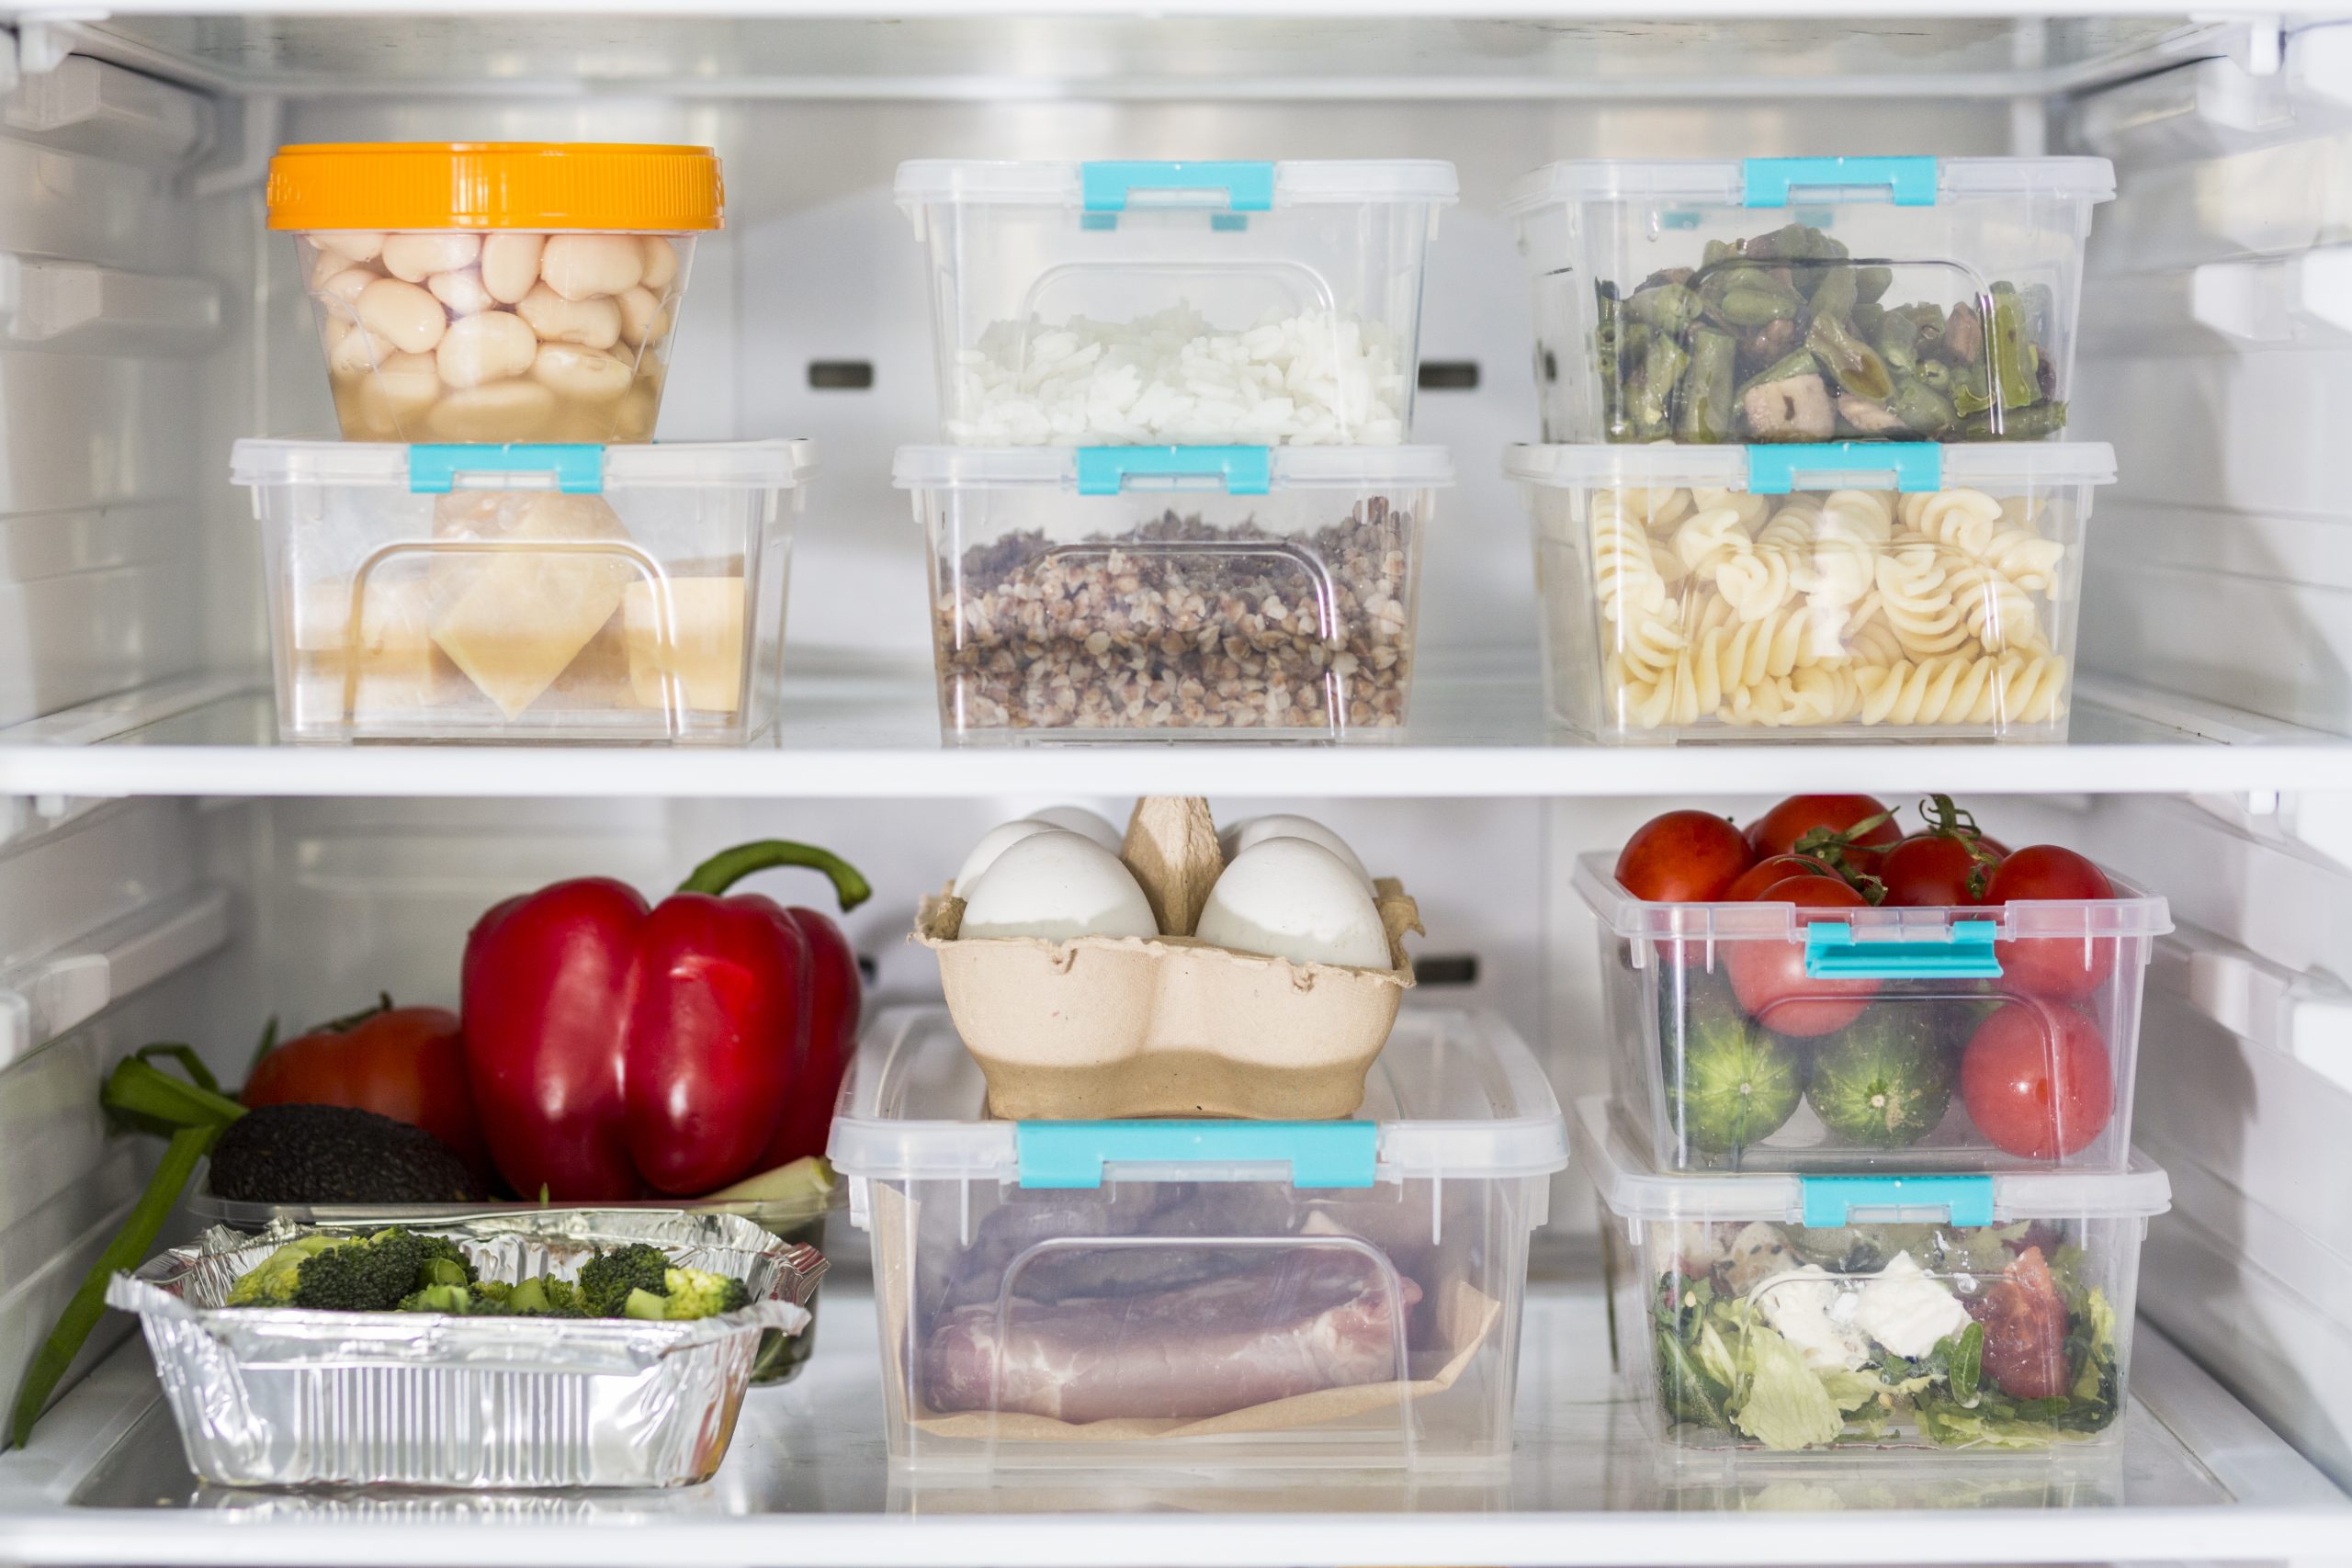 open-fridge-with-plastic-food-containers-vegetables